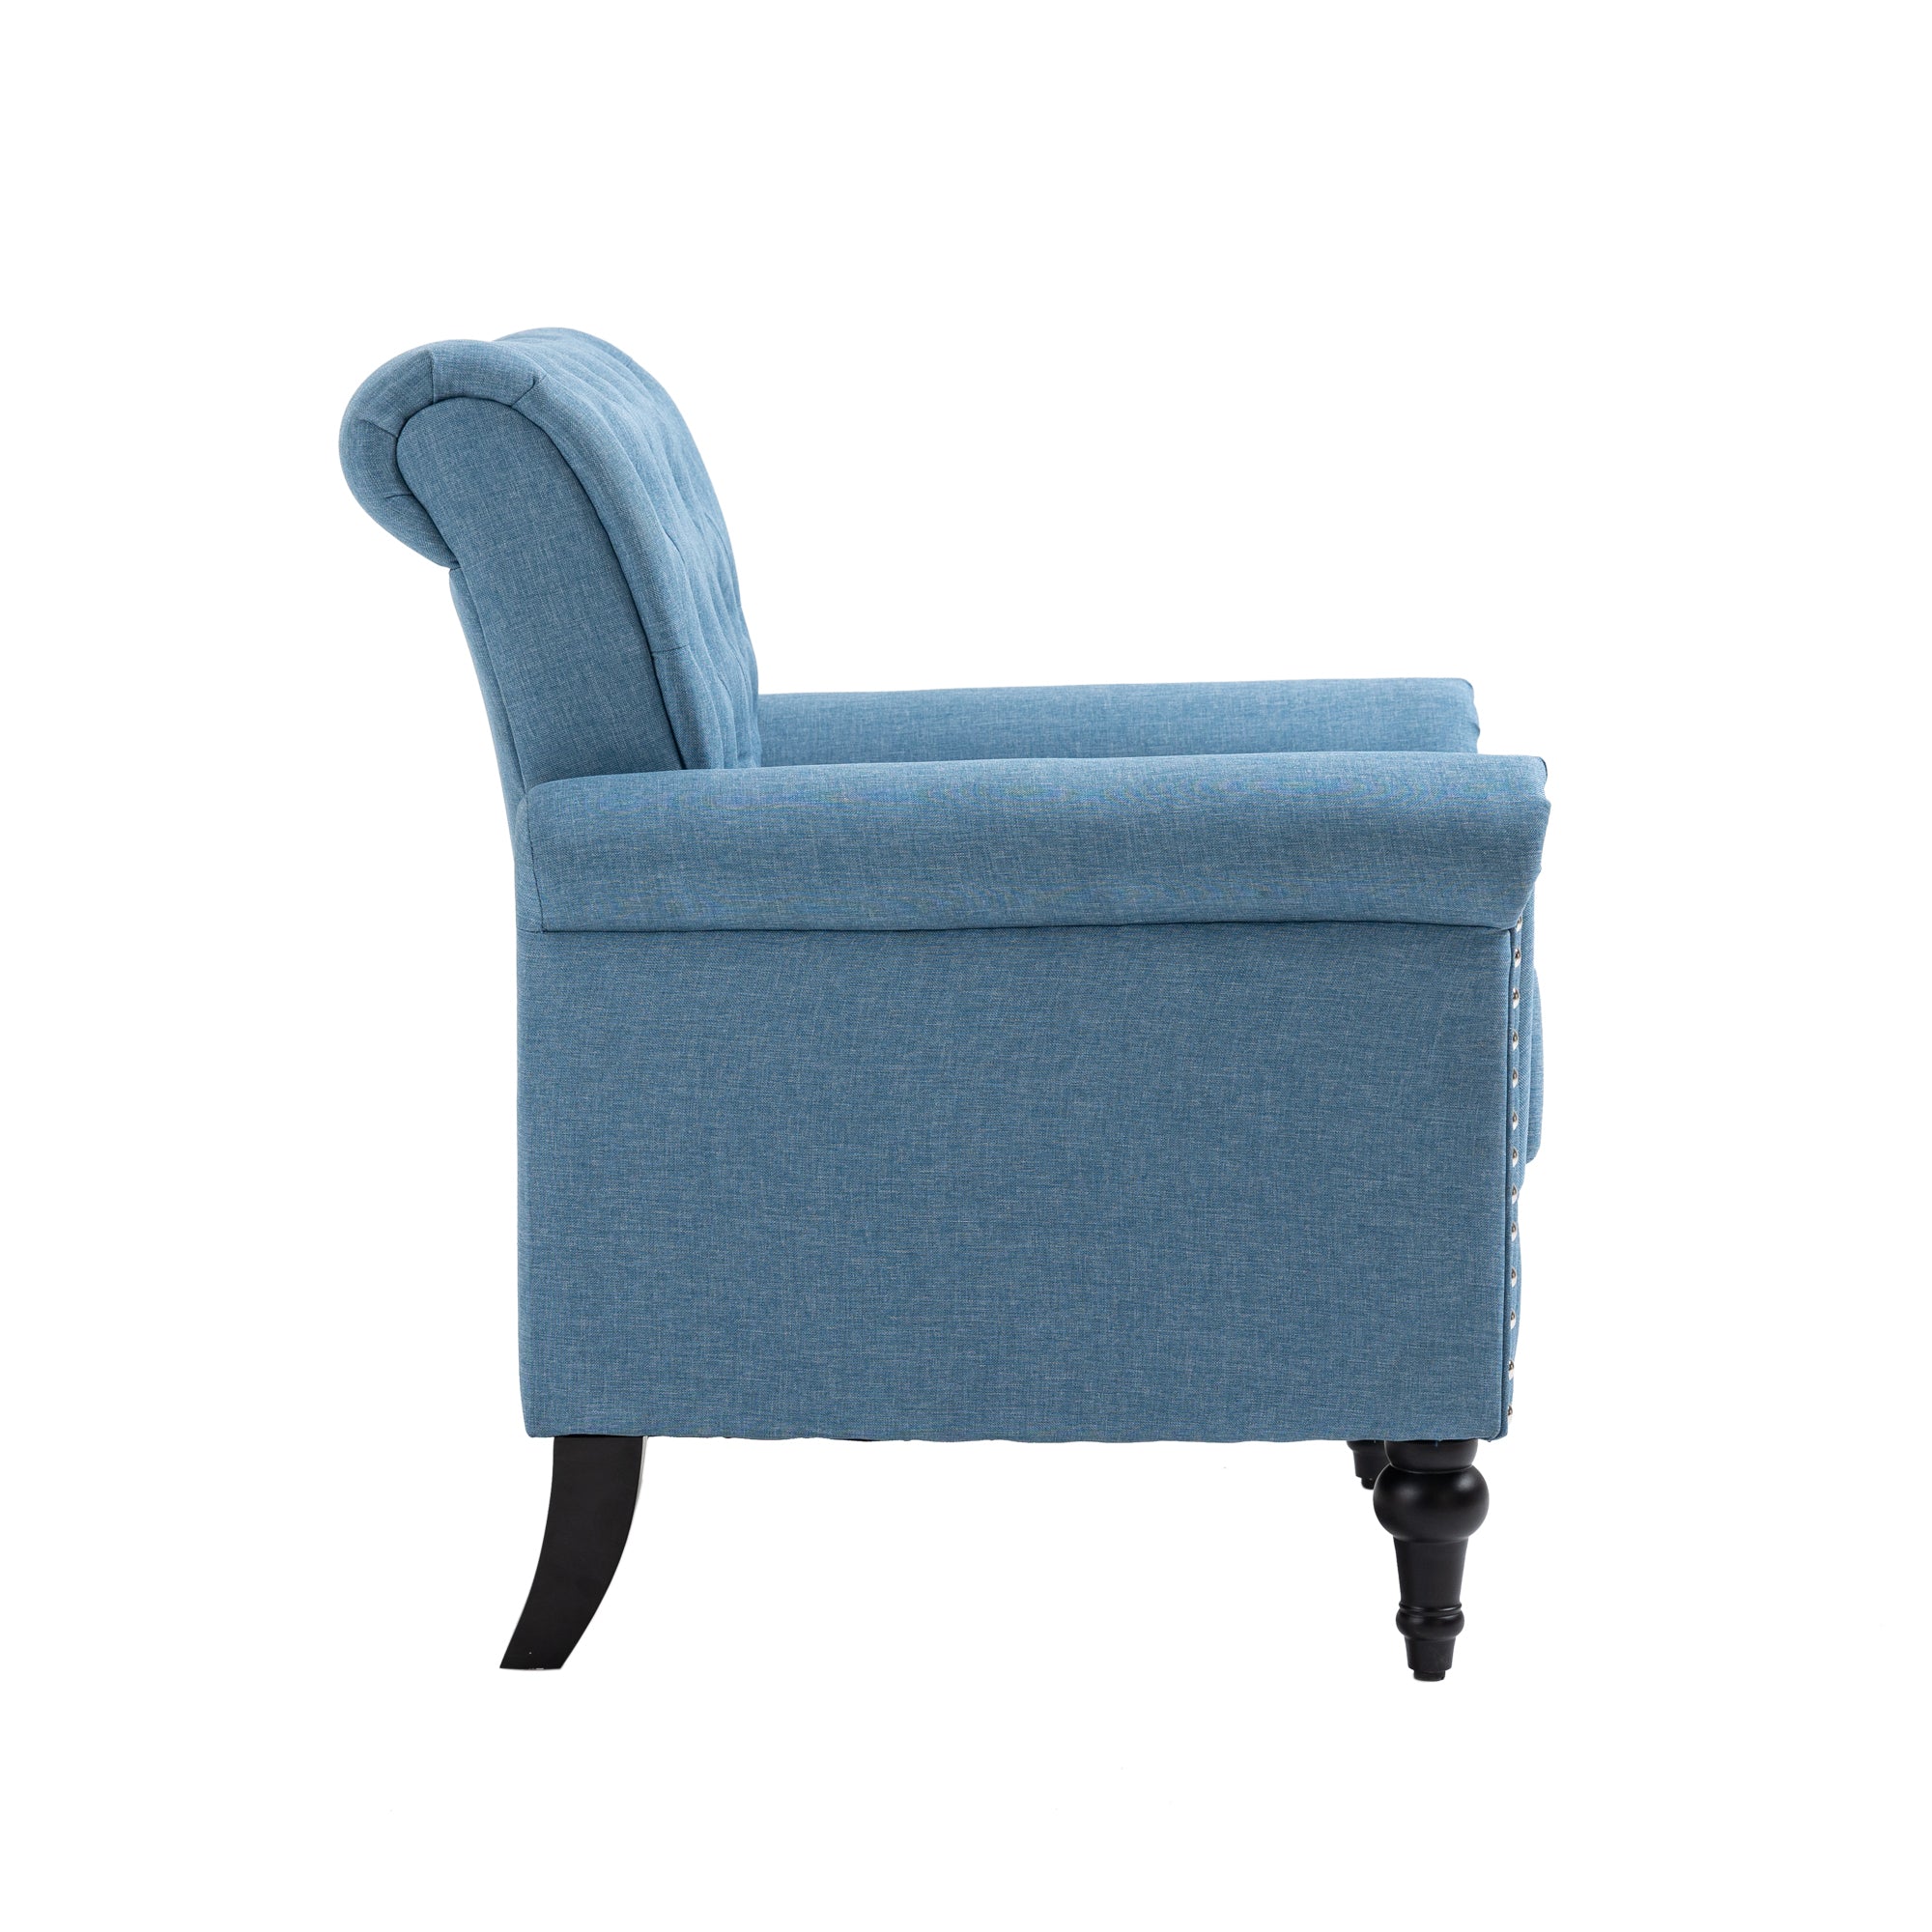 Mid-Century Modern Accent Chair, Linen Armchair w/Tufted Back/Wood Legs, Upholstered Lounge Arm Chair Single Sofa for Living Room Bedroom,Light Blue